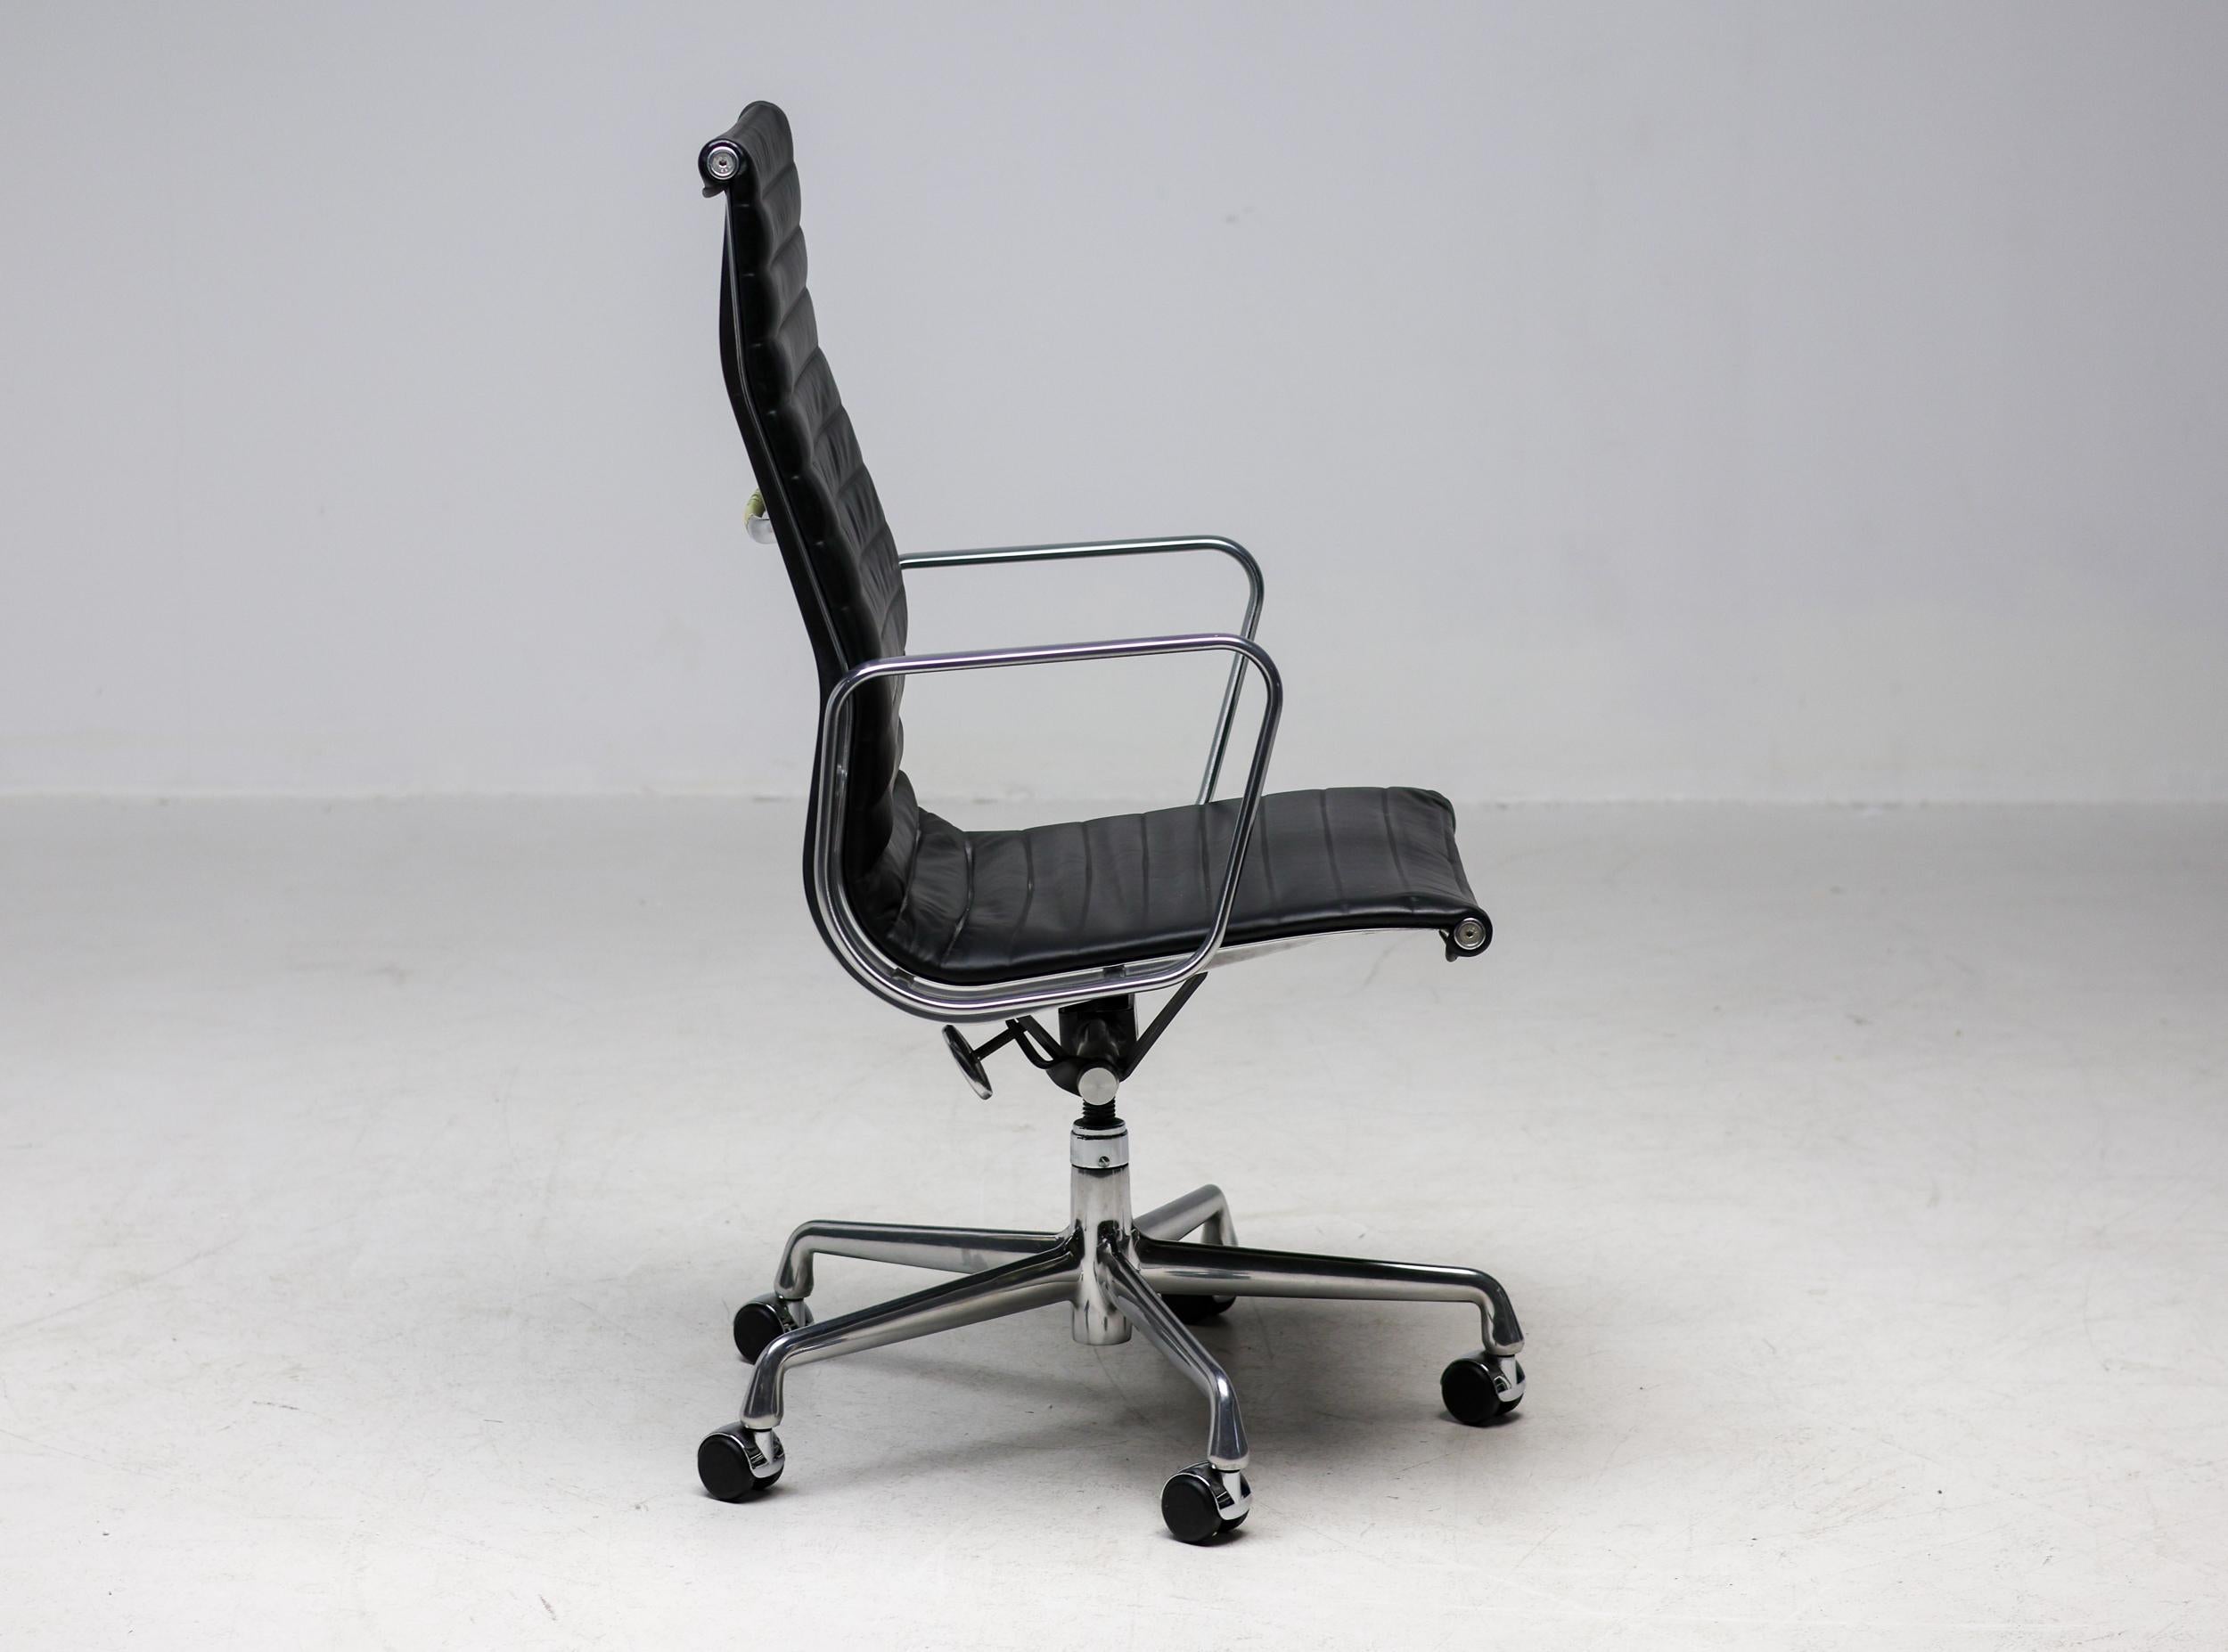 Executive office chair, model EA119, in the USA known as EA337, designed by Charles and Ray Eames for Herman Miller. Backrest and seat in black leather, both front and rear. Frame, armrests and five-star base in die-cast aluminium. Seat mechanism